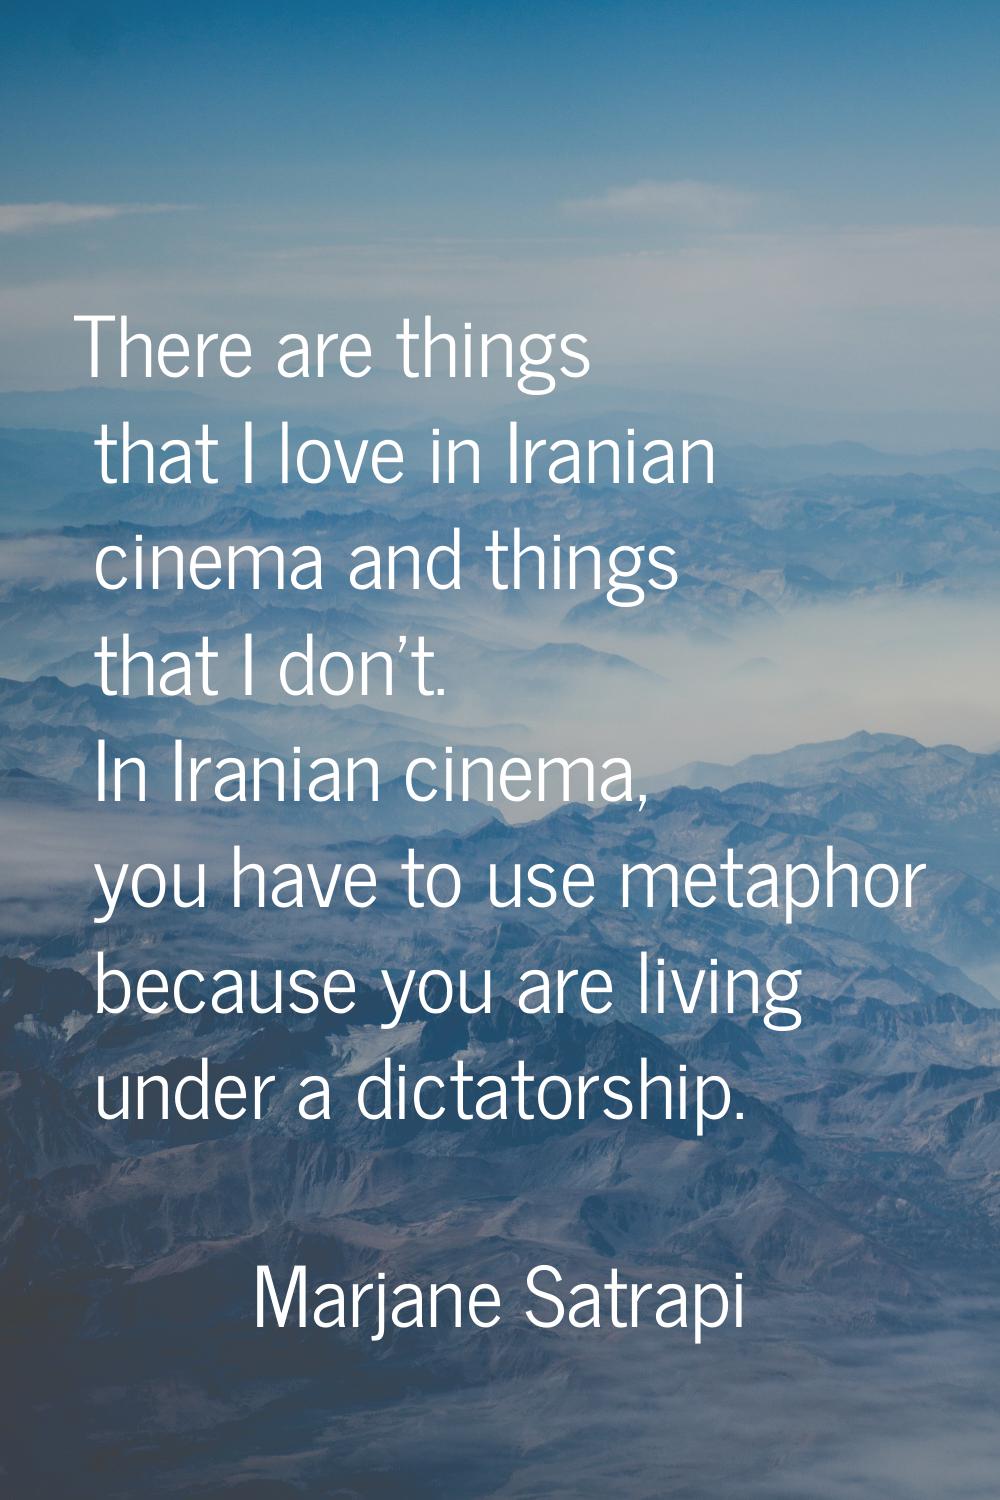 There are things that I love in Iranian cinema and things that I don't. In Iranian cinema, you have